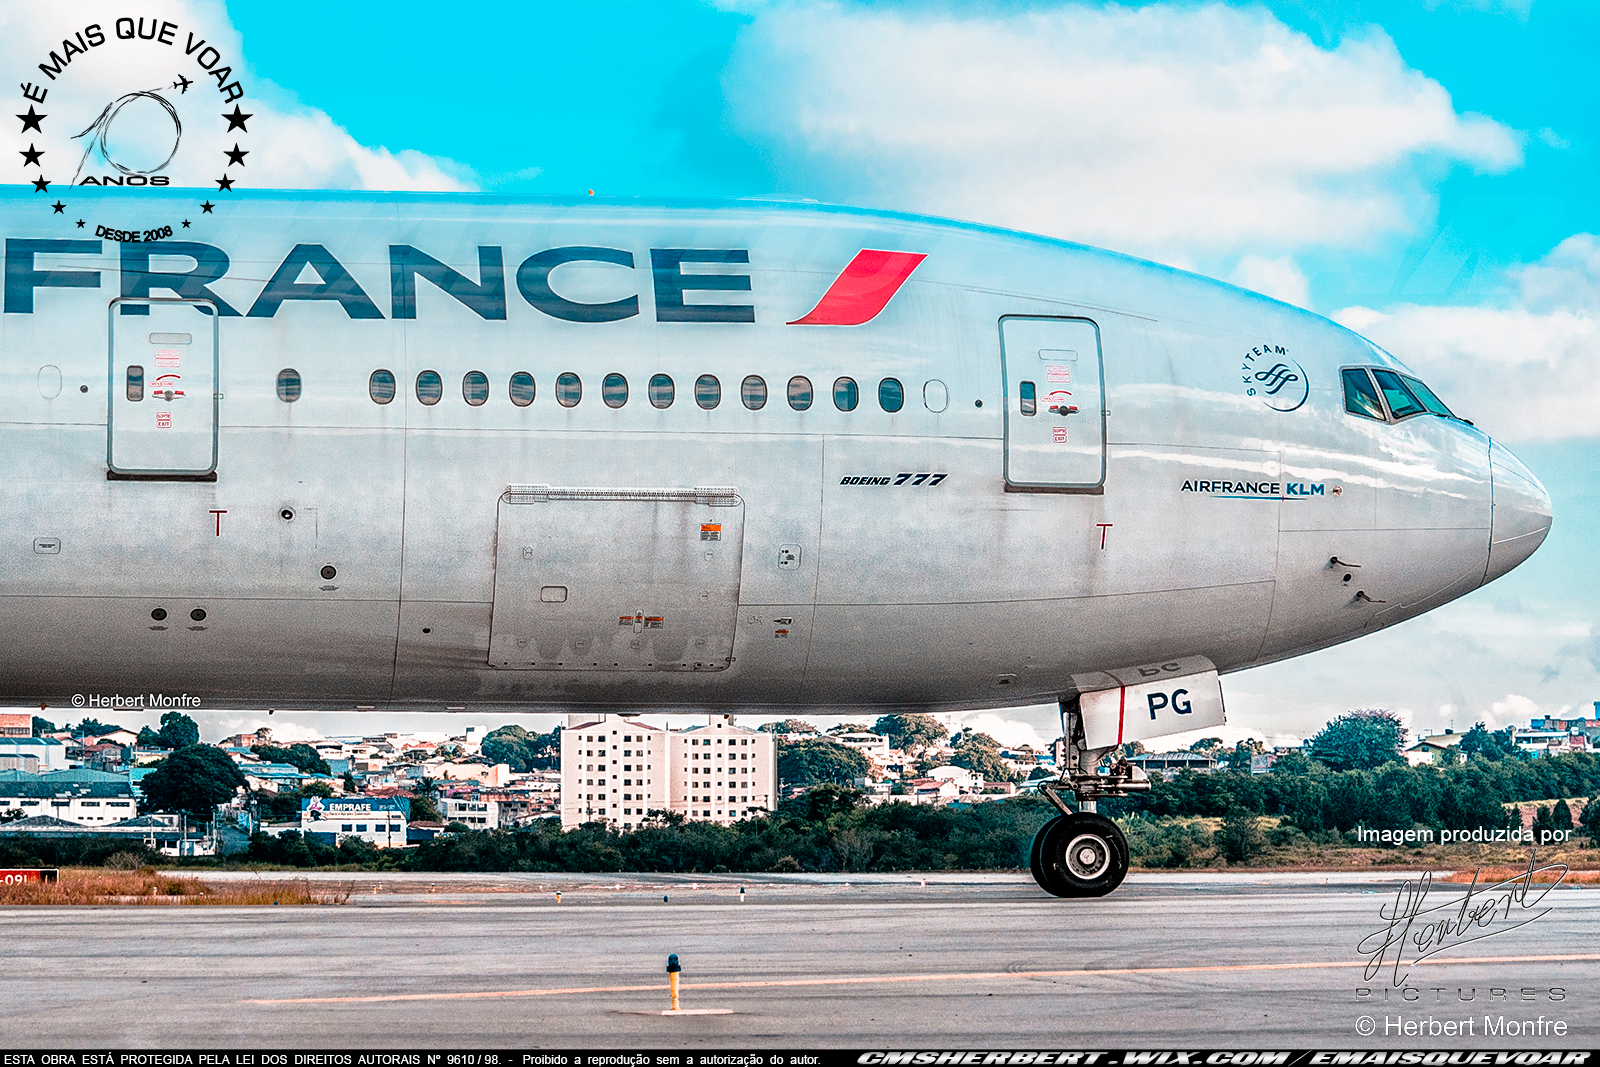 Air France Expands Flights to Sao Paulo | Photo © Herbert Monfre - Airplane photographer - Events - Advertising - Essays - Hire the photographer by e-mail cmsherbert@hotmail.com | Image produced by Herbert Pictures - MORE THAN FLY